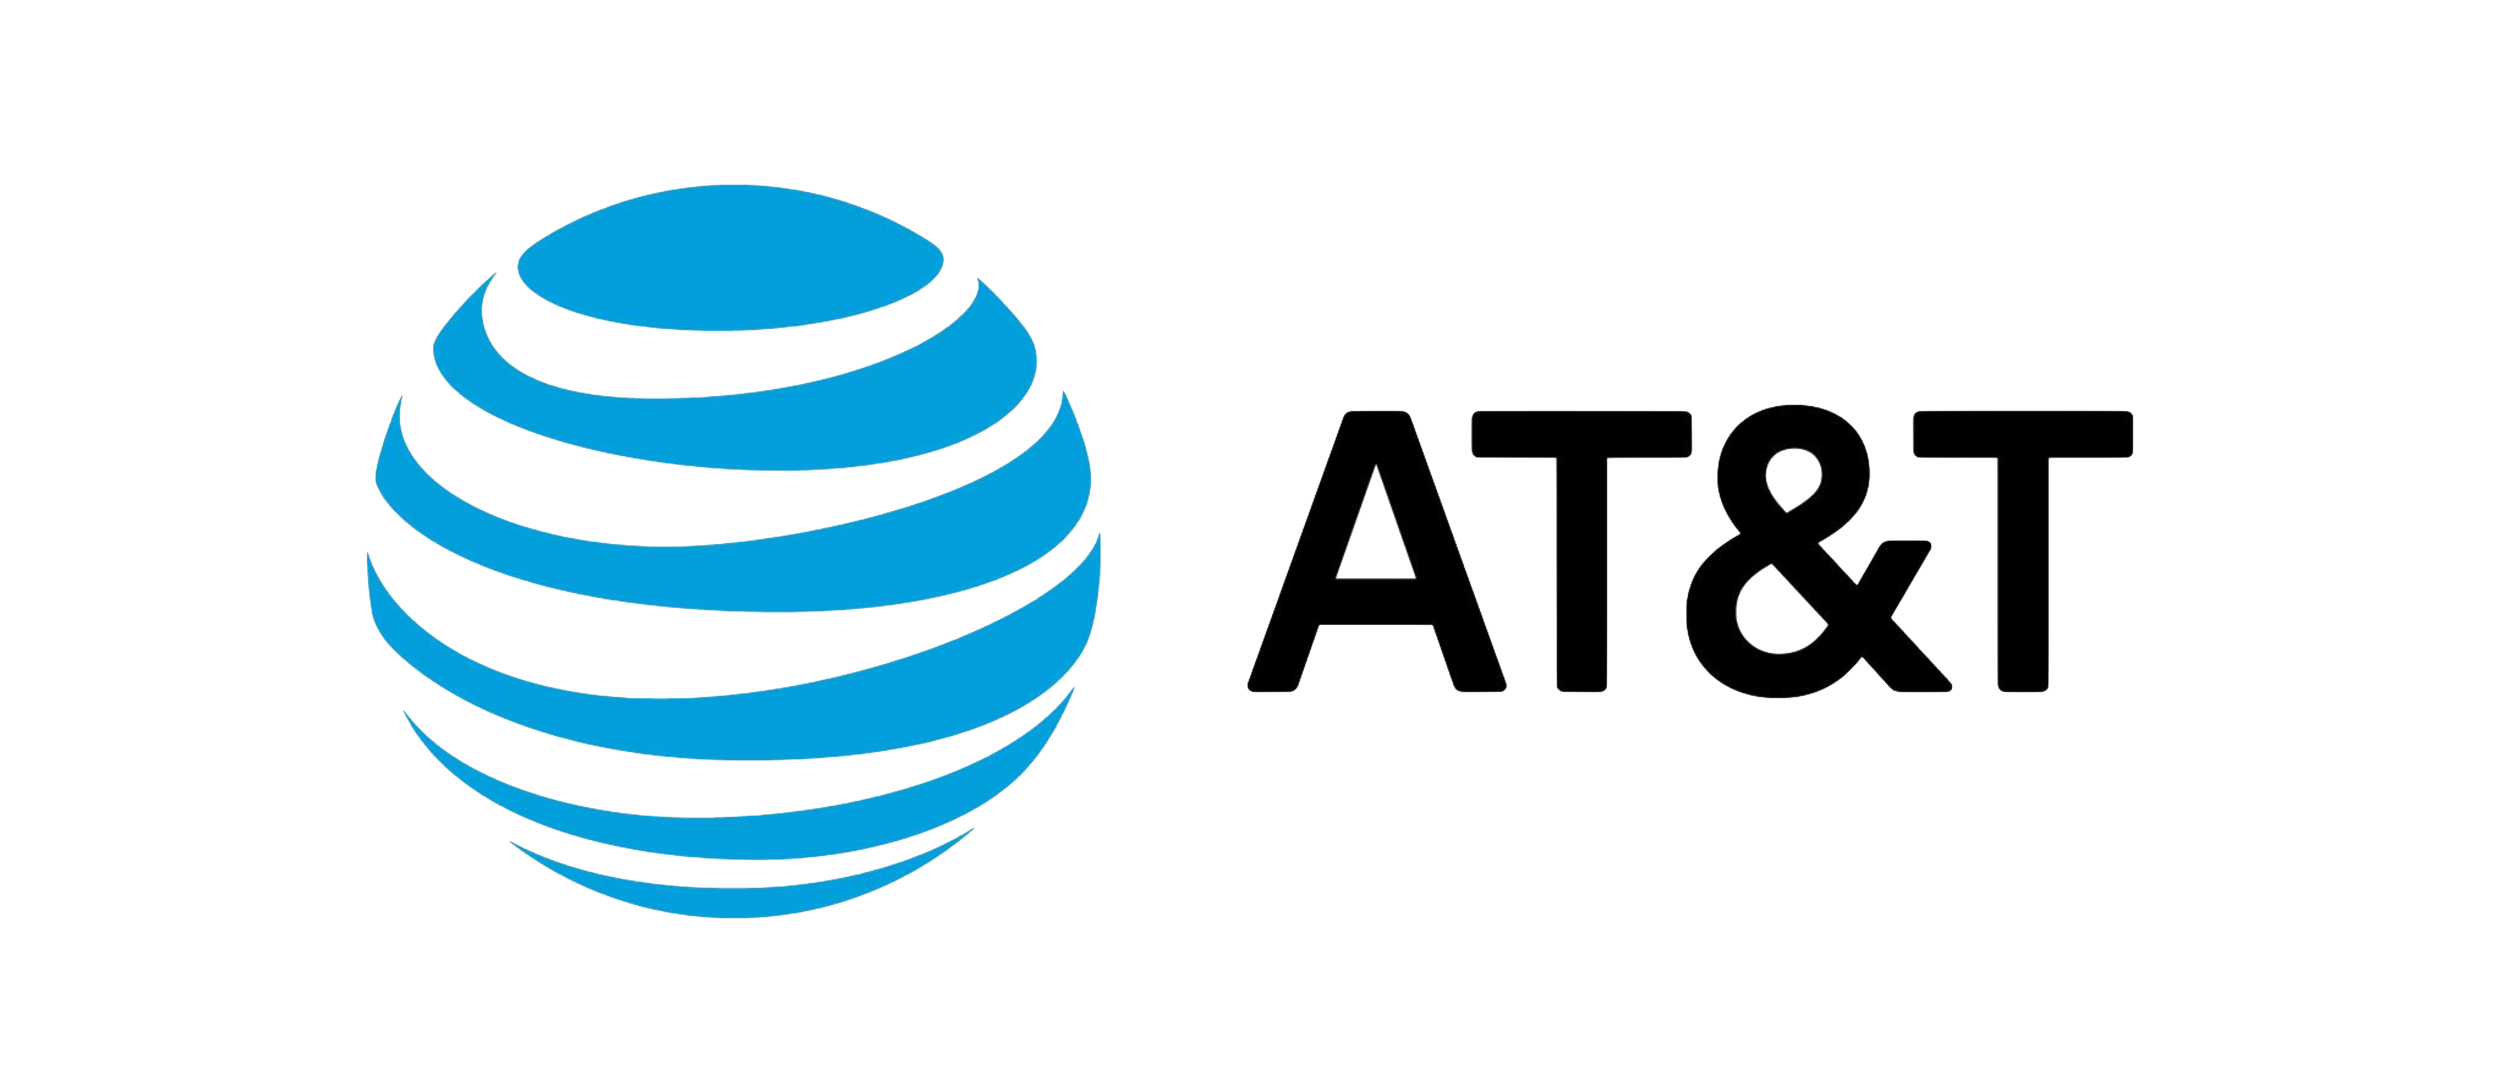 ATT-logo-with-letters-on-right_Nov2019.png